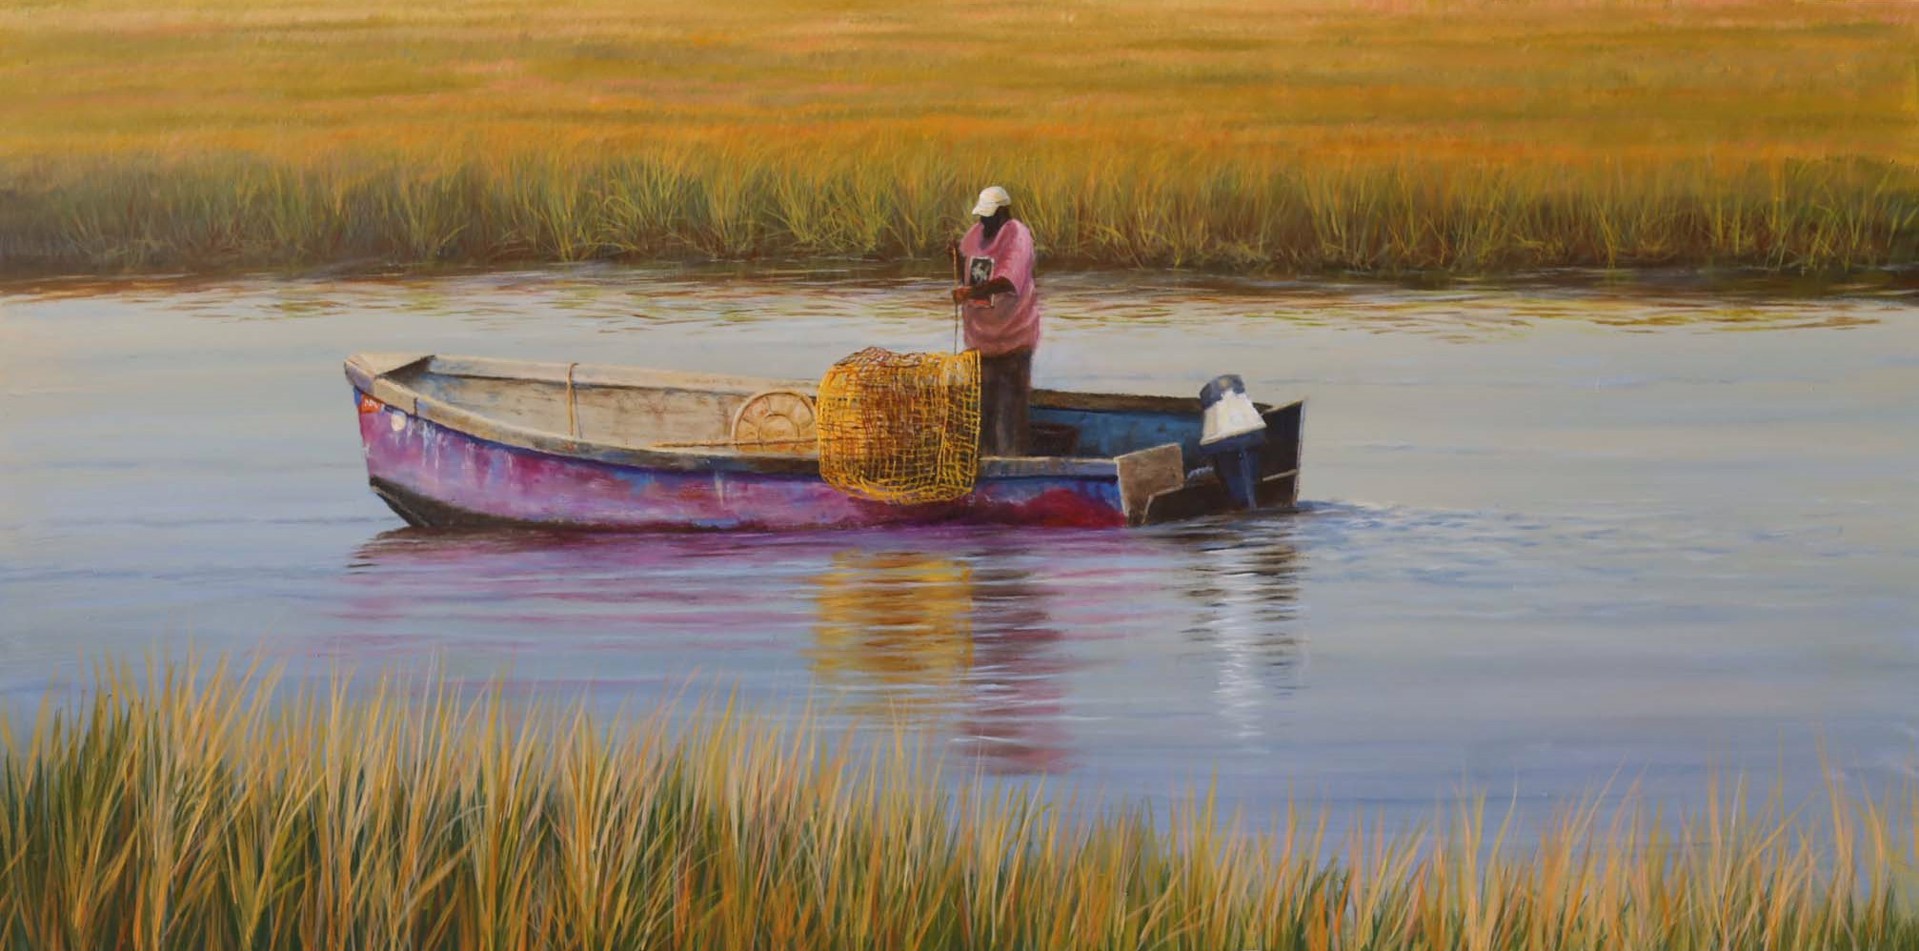 Crabbing in the Painted Boat by Douglas Grier